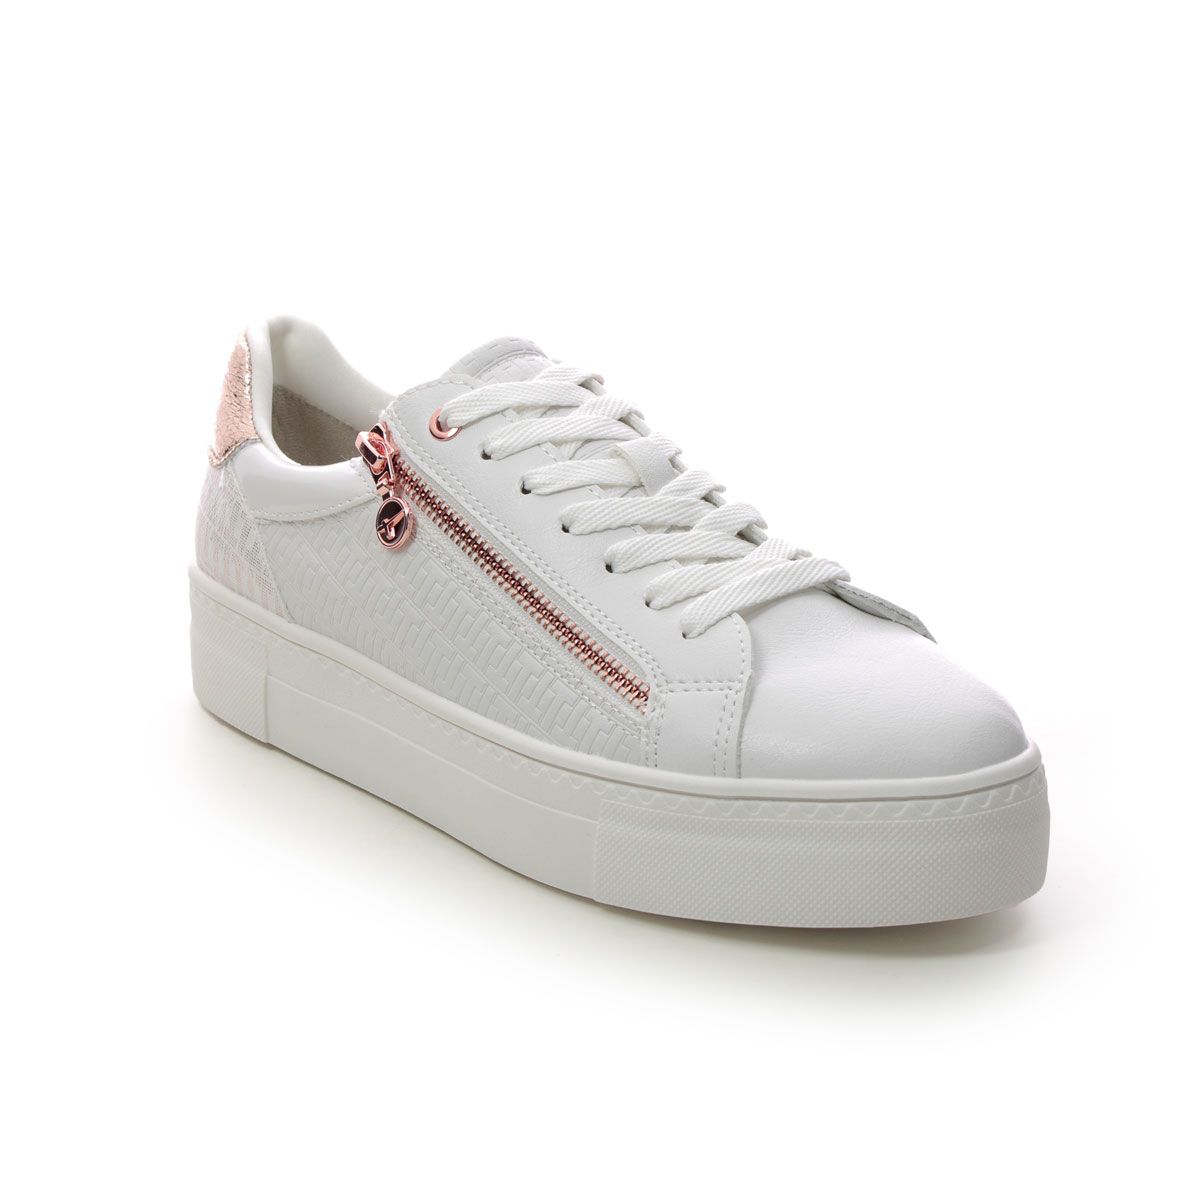 Tamaris Lima Zip White Rose Gold Womens Trainers 23313-20-196 In Size 40 In Plain White Rose Gold